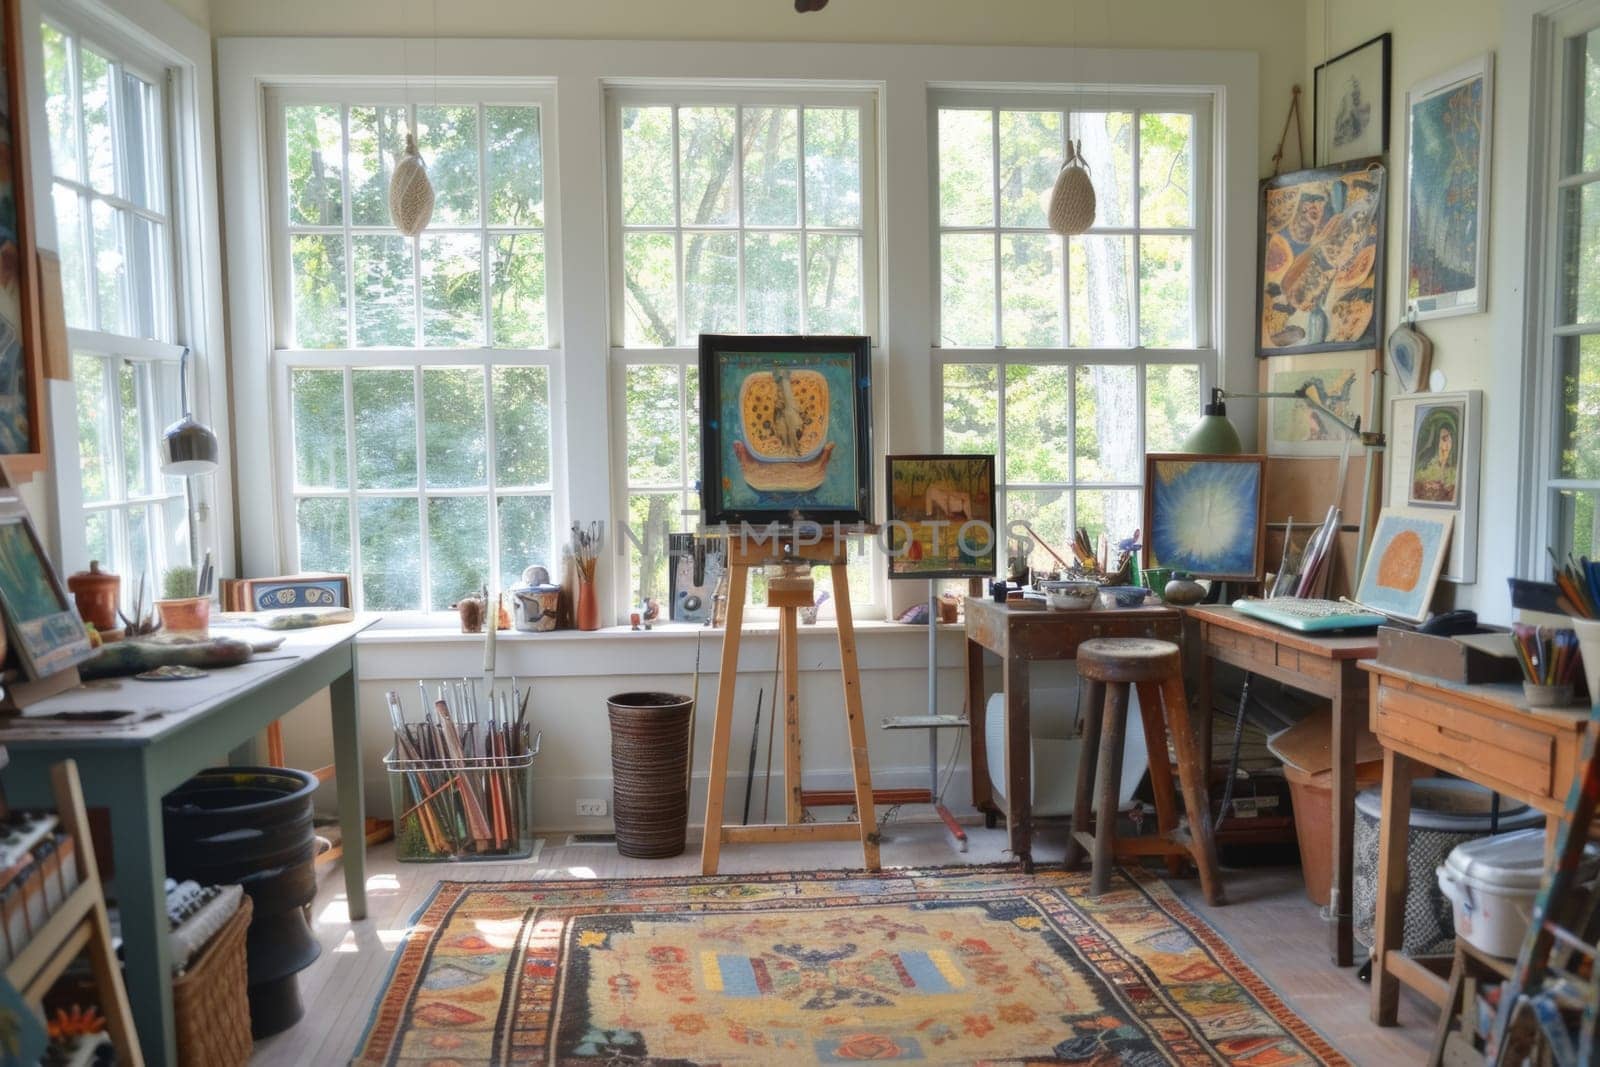 A cozy artist's home studio bathed in sunlight, with a painting in progress, surrounded by books, plants, and personal treasures that inspire creativity